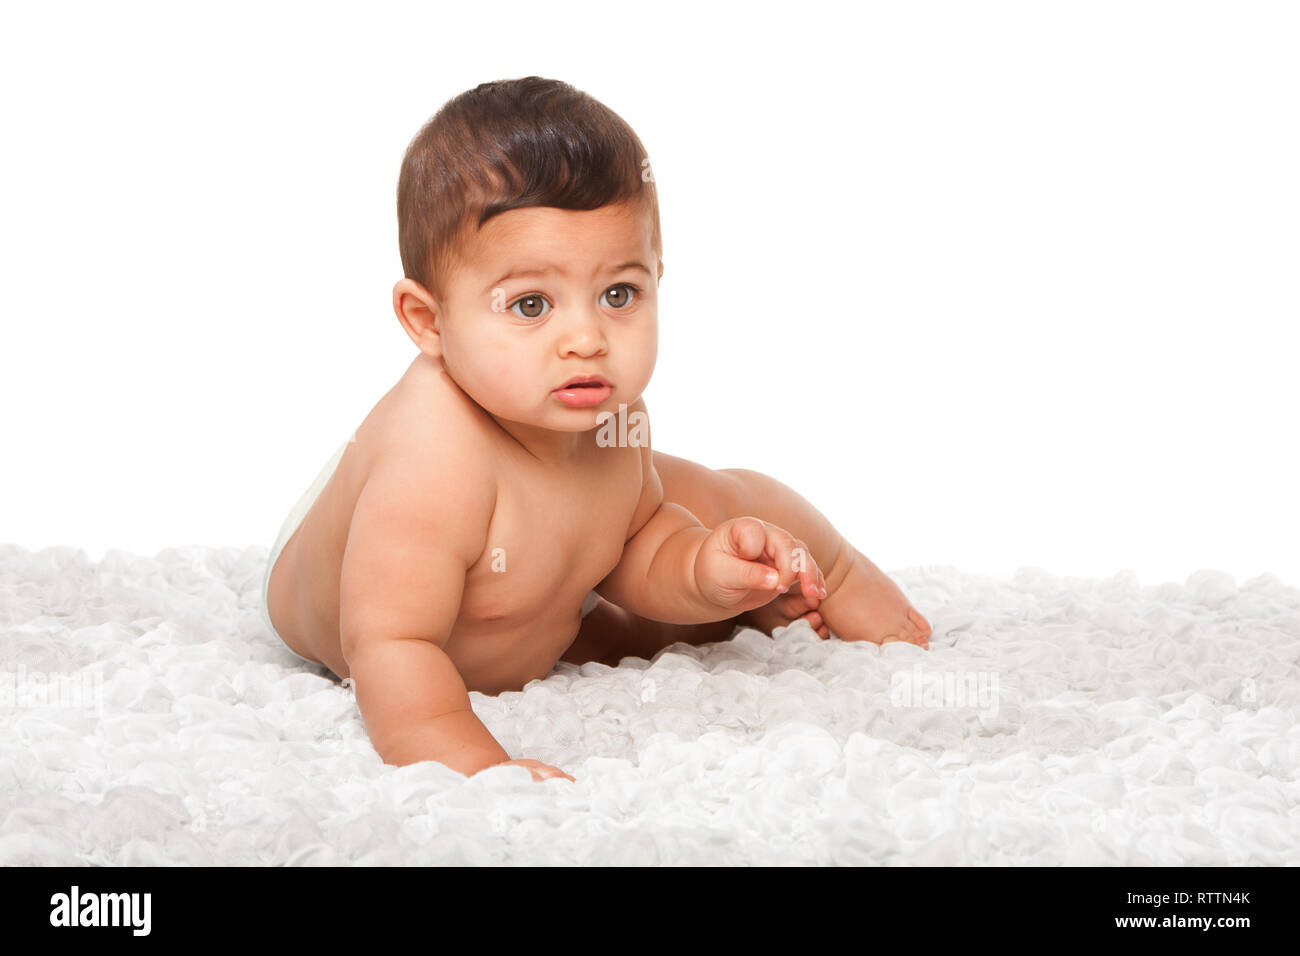 Cute happy innocent baby infant with big light green eyes, childhood concept, on white. Stock Photo